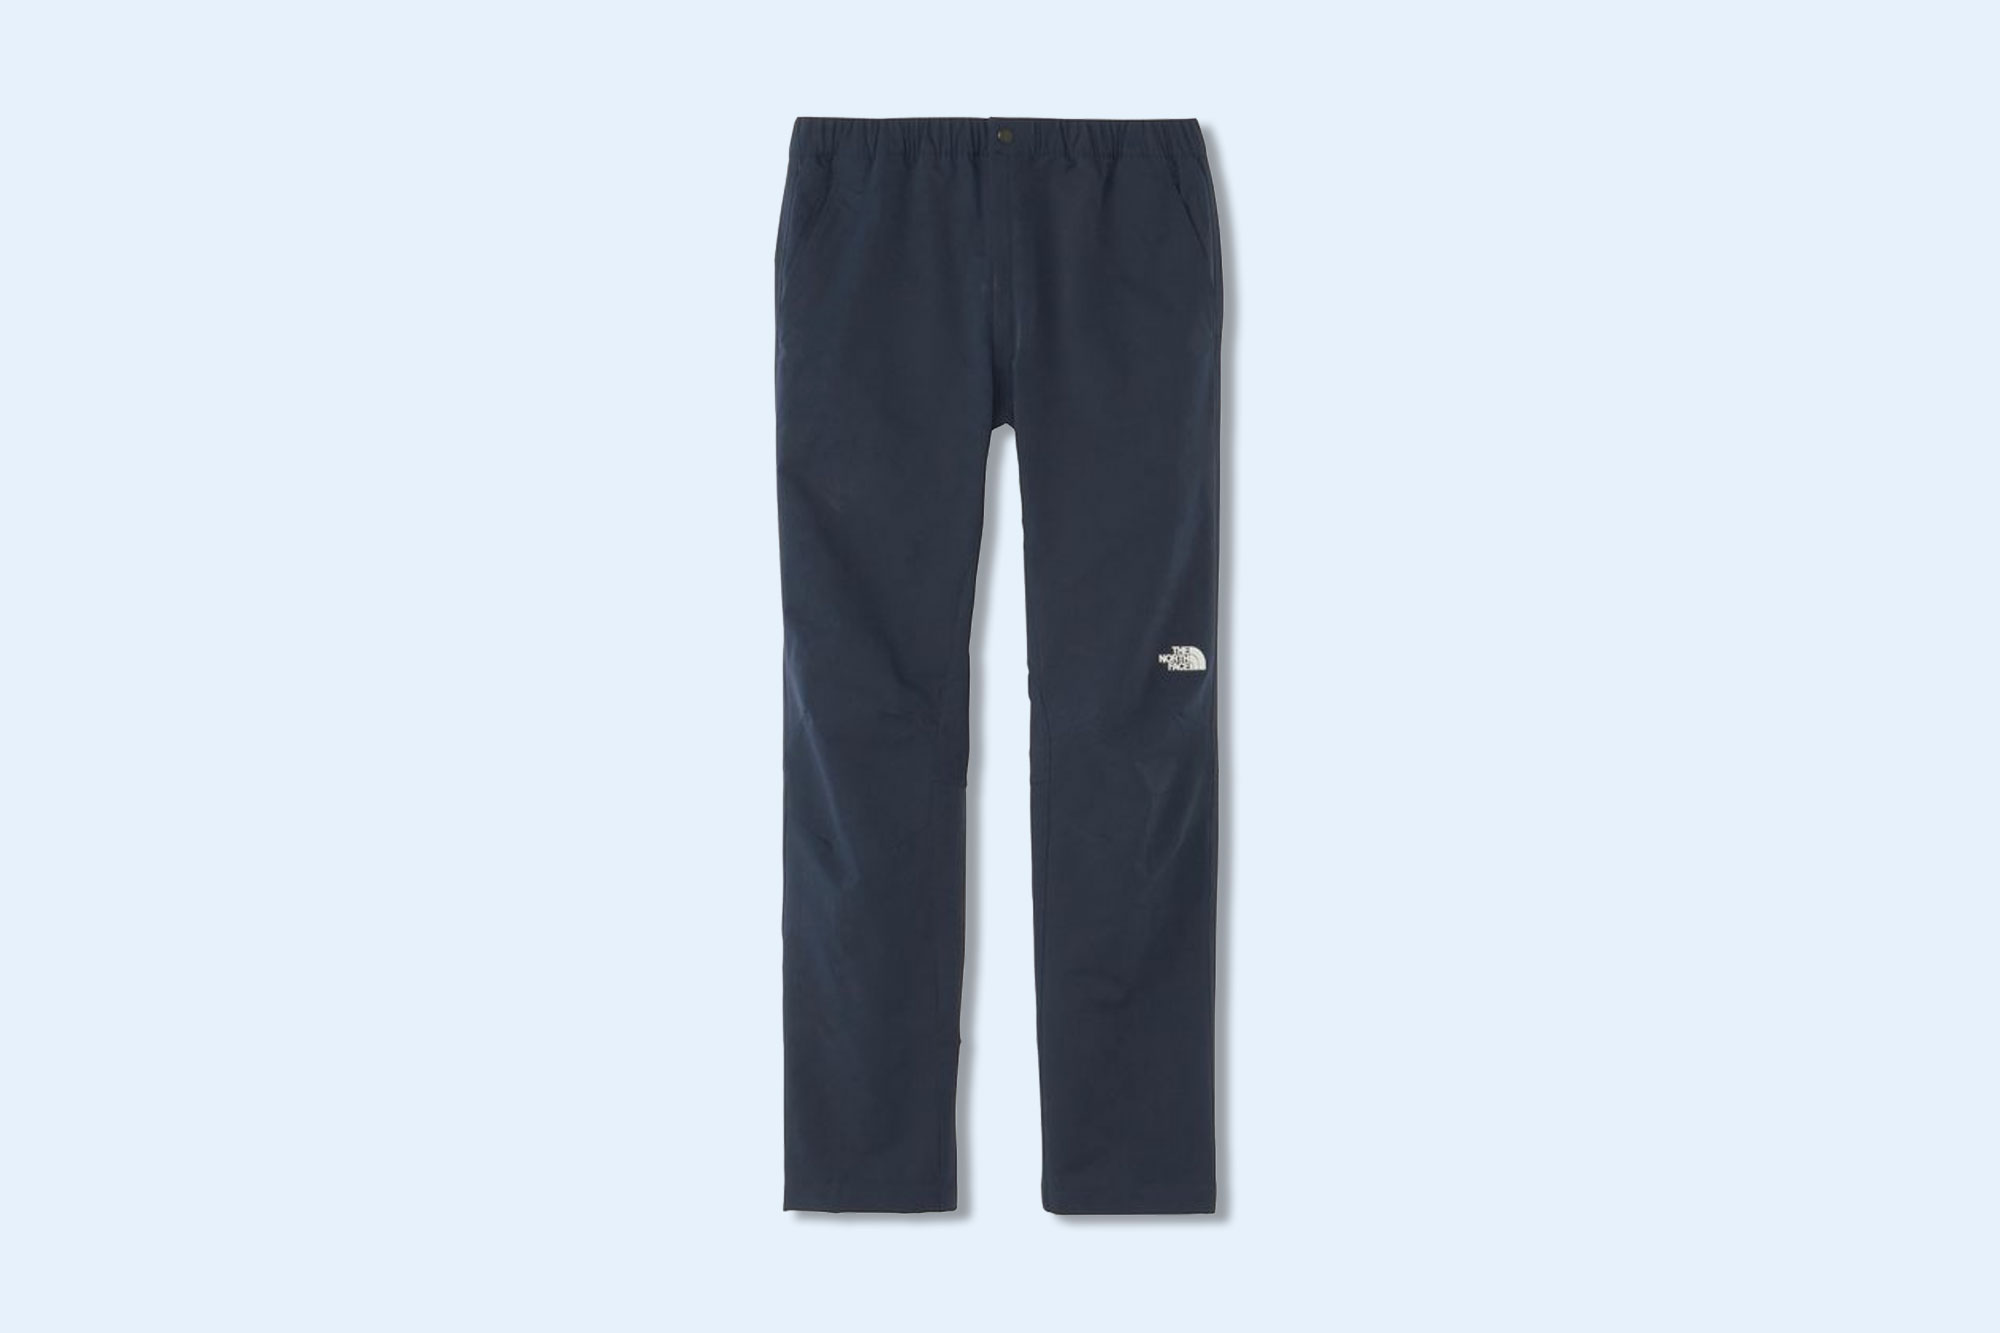 THE NORTH FACE "Doro Light Pant"